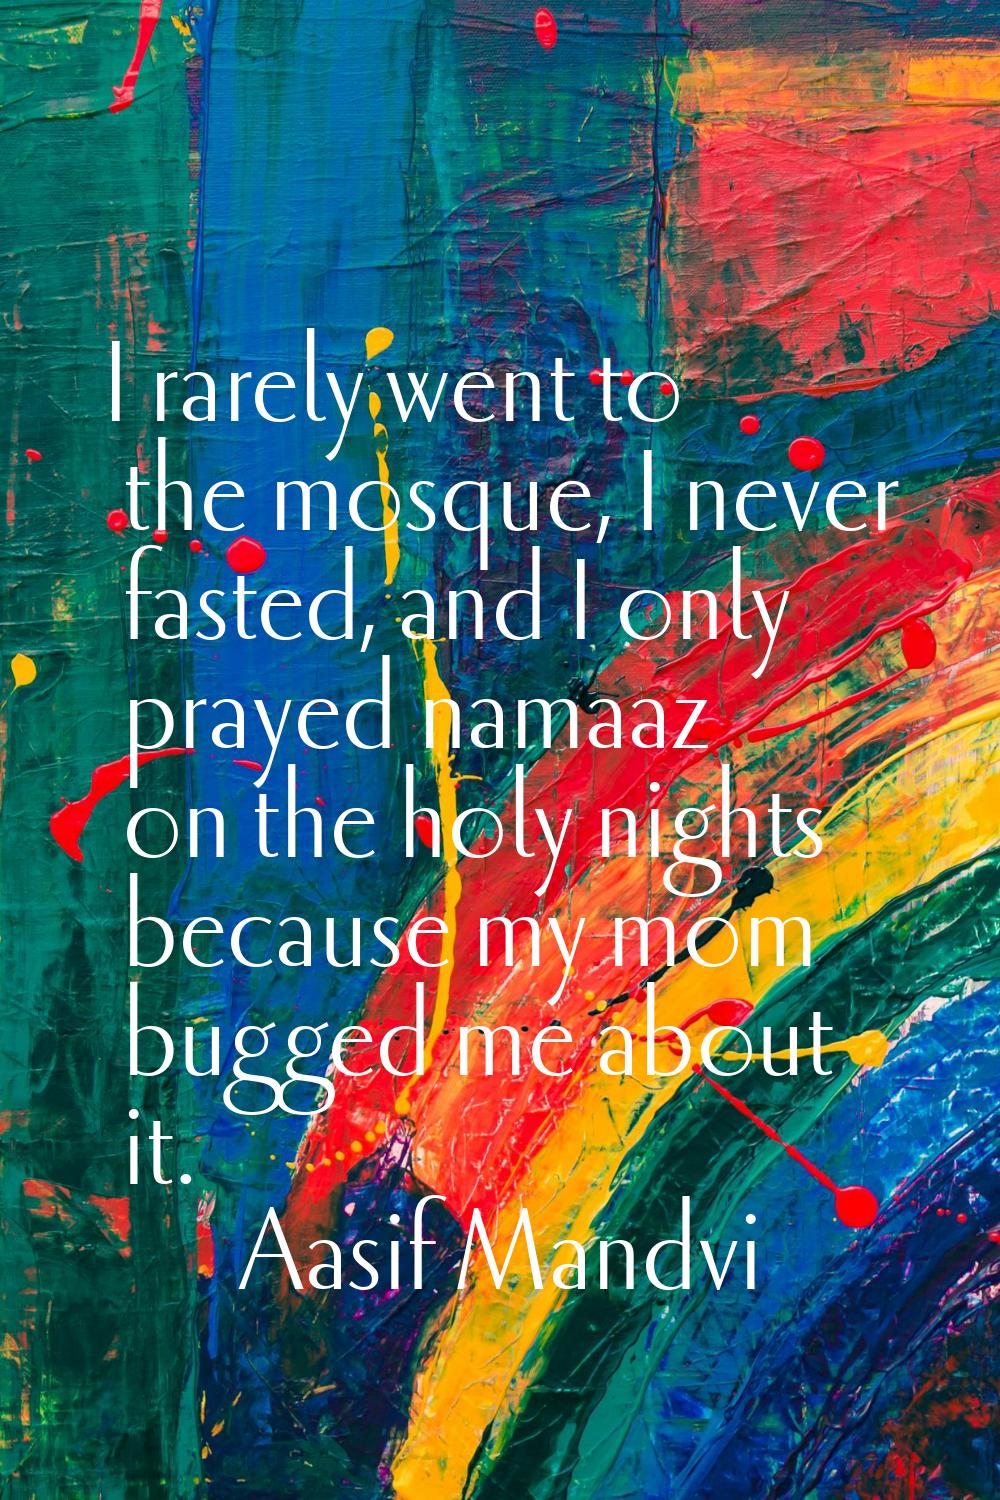 I rarely went to the mosque, I never fasted, and I only prayed namaaz on the holy nights because my